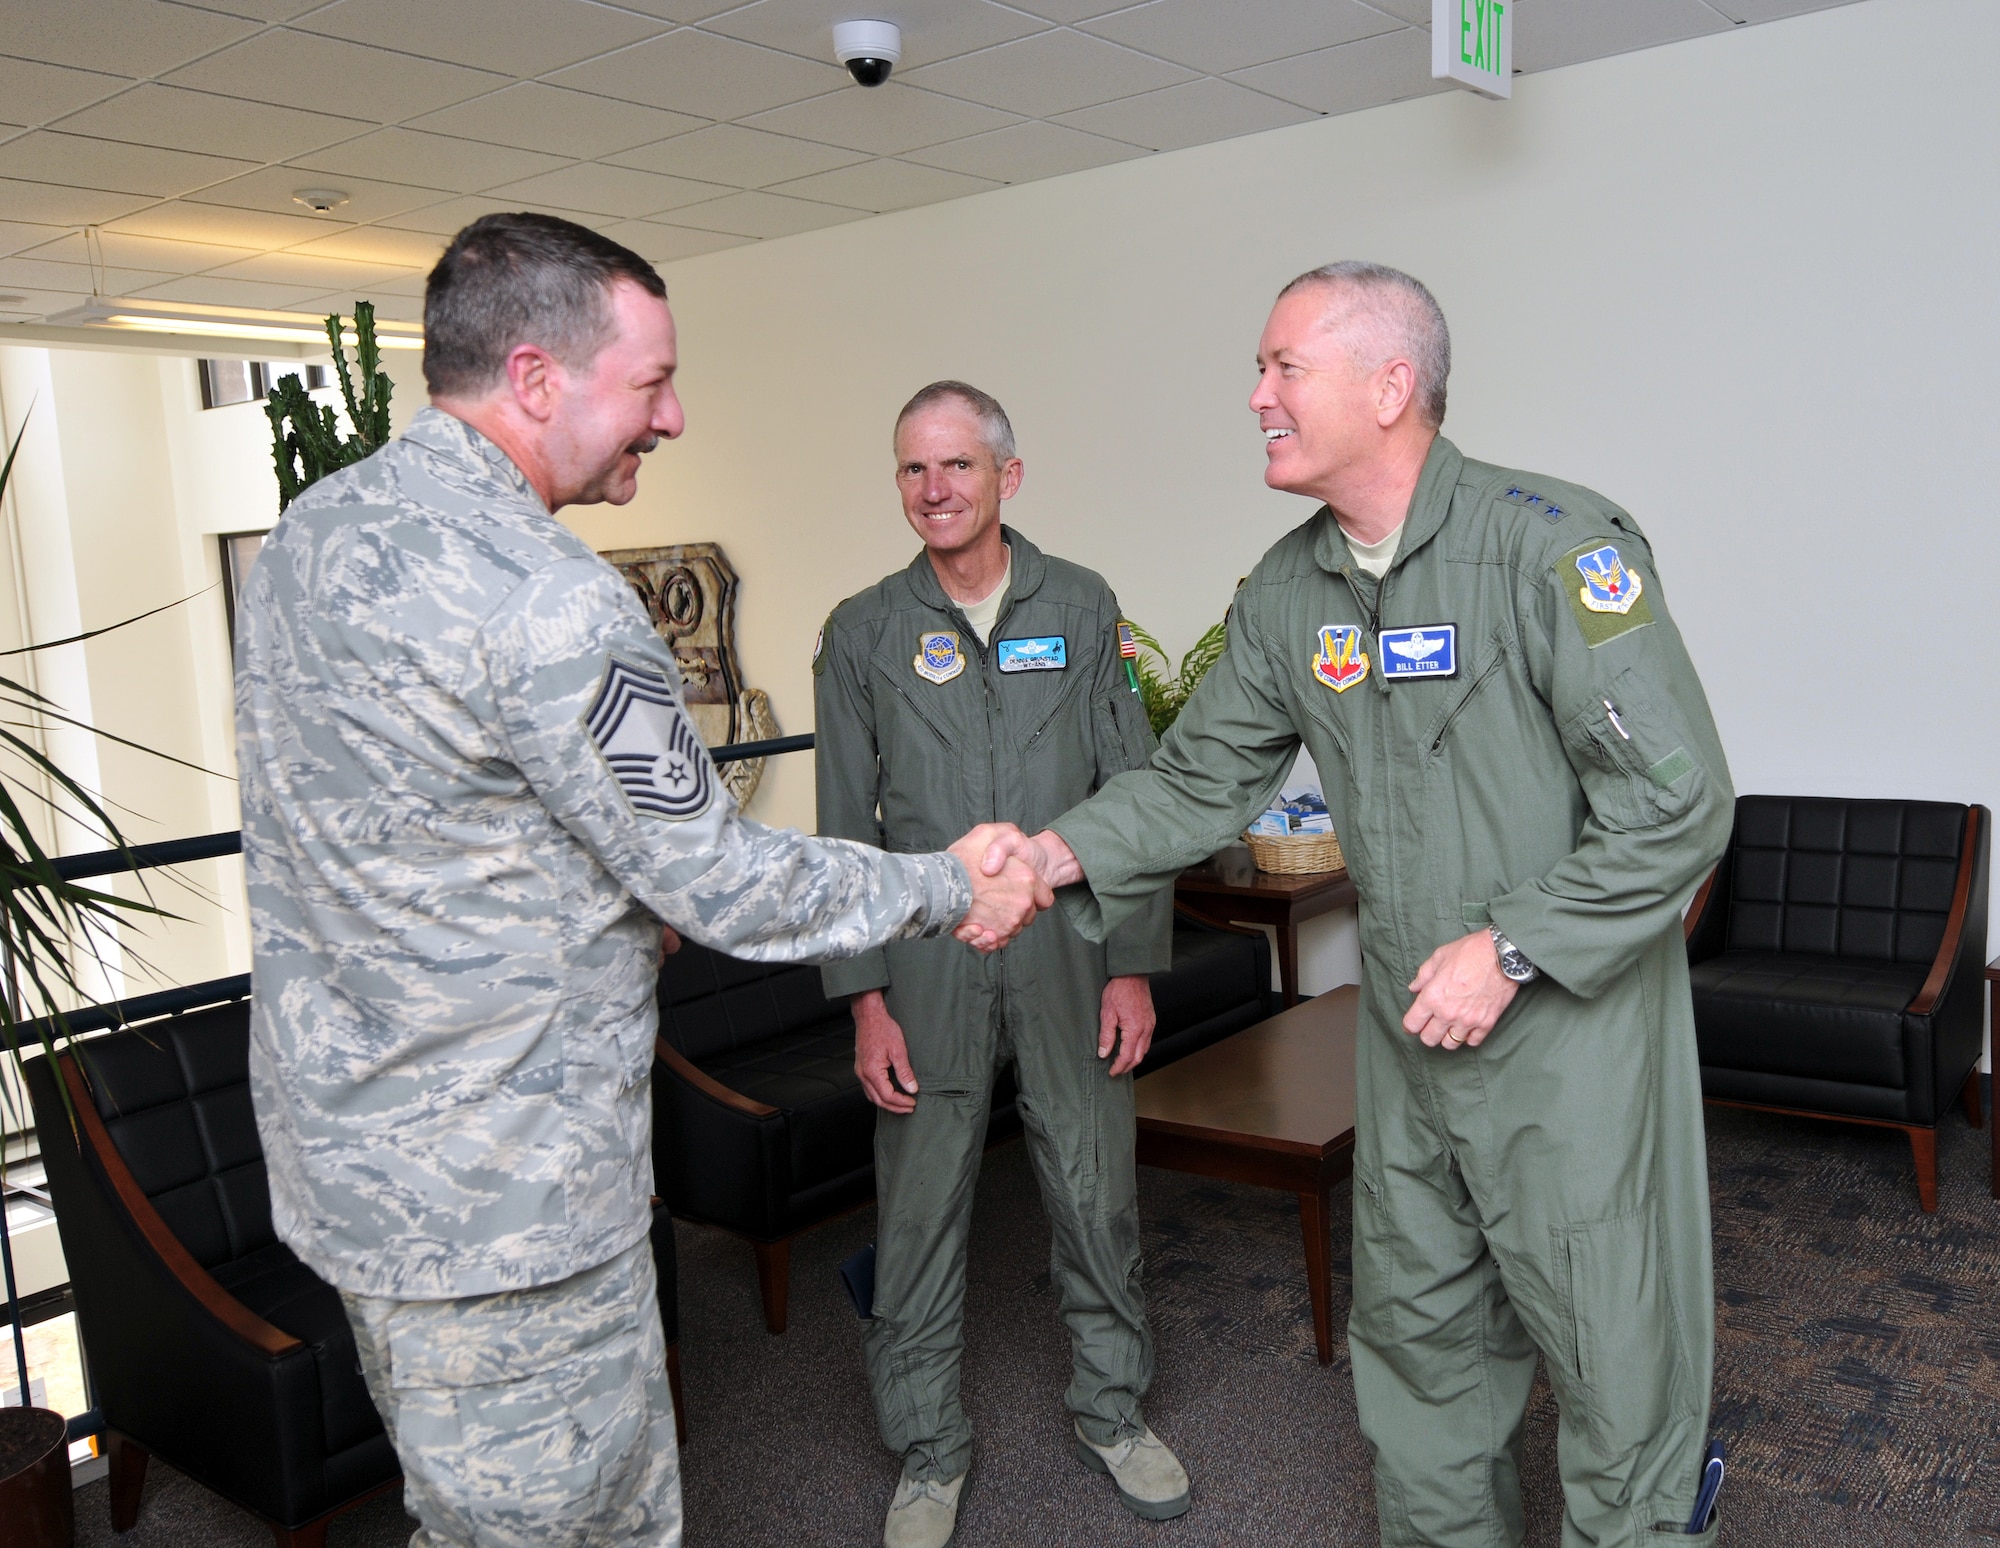 U.S. Air Force Chief Master Sgt. Andy Huneycutt, loadmaster for the 156th Airlift Squadron, North Carolina Air National Guard, meets Lt. Gen. William A. Etter, 1st Air Force commander and Col. Dennis Grunstad, assistant adjutant general-Air, Wyoming Air National Guard, during the annual Modular Airborne Fire Fighting System training for certification. Chief Huneycutt is one of two survivors of MAFFS 7, the 145th Airlift Wing C-130 Hercules aircraft that crashed while fighting forest fires in South Dakota, July 1, 2012. The 153rd Airlift Wing, Wyoming Air National Guard, hosts the 2013 MAFFS training at the Cheyenne Regional Airport, Cheyenne, Wyo., May 7, 2013. (U.S. Air National Guard photo by Tech. Sgt. Patricia Findley/Released)